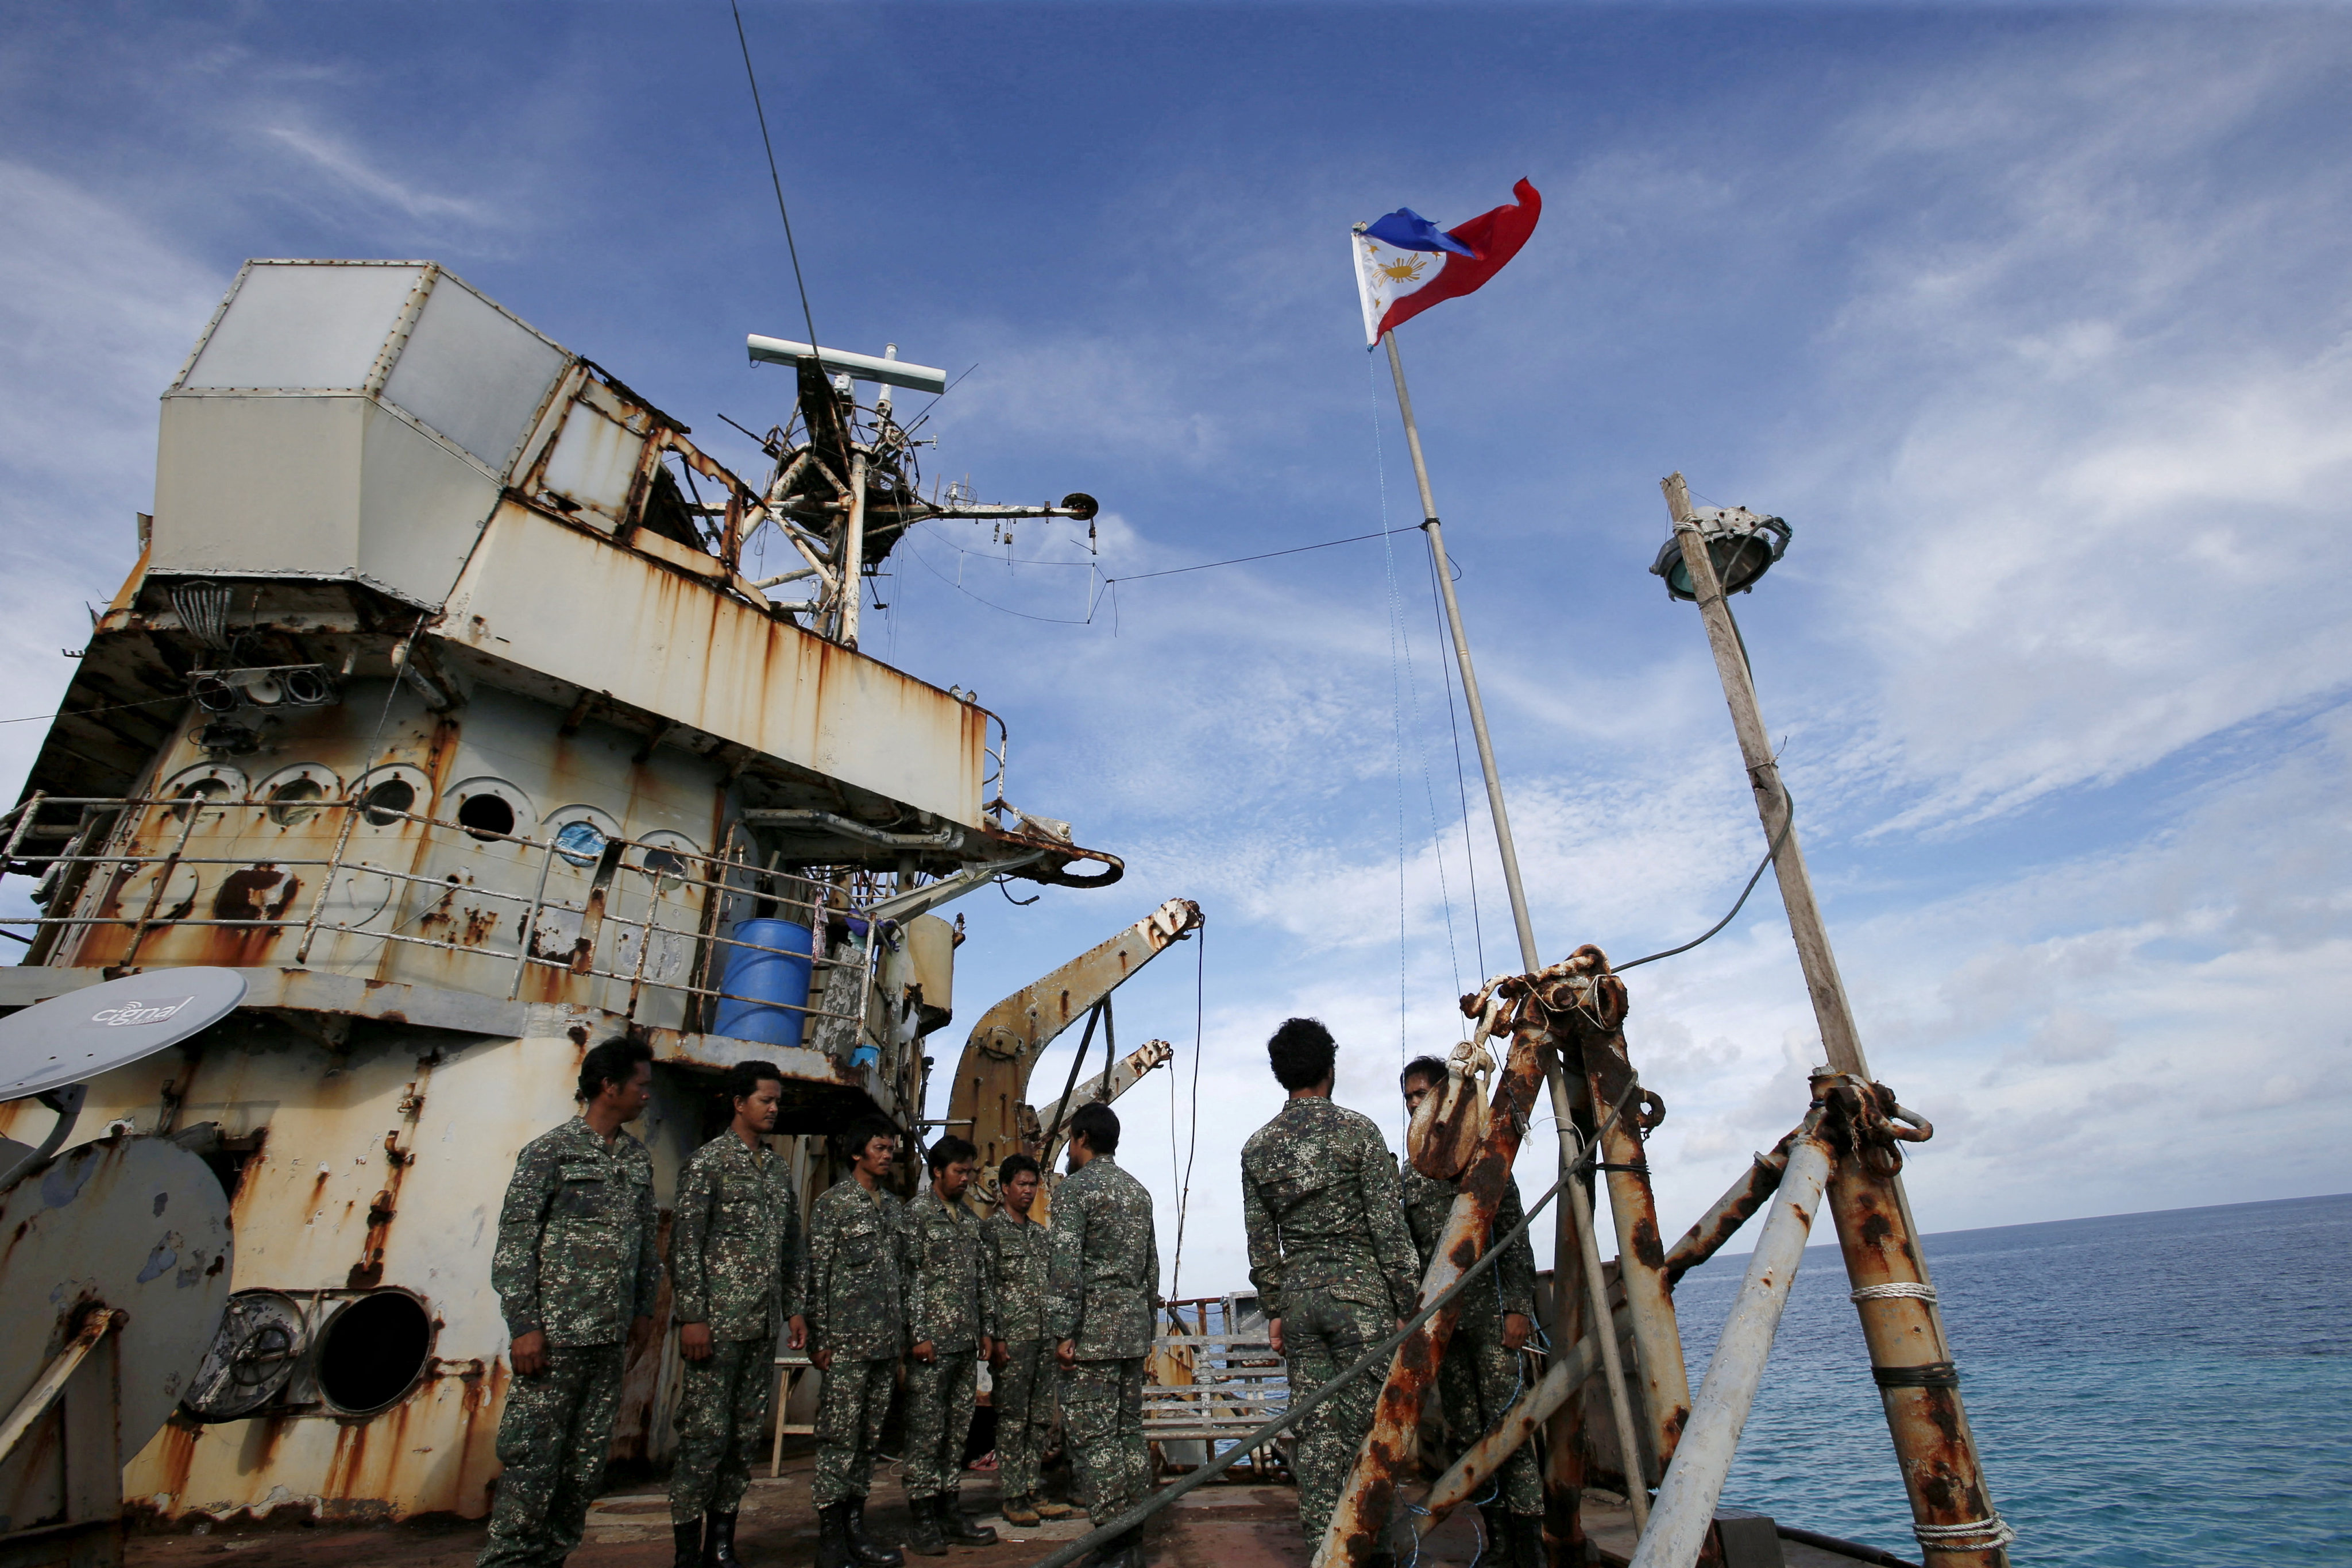 Philippine Marines on the BRP Sierra Madre, a dilapidated warship that has been grounded on Second Thomas Shoal in the South China Sea since 1999. Photo: Reuters